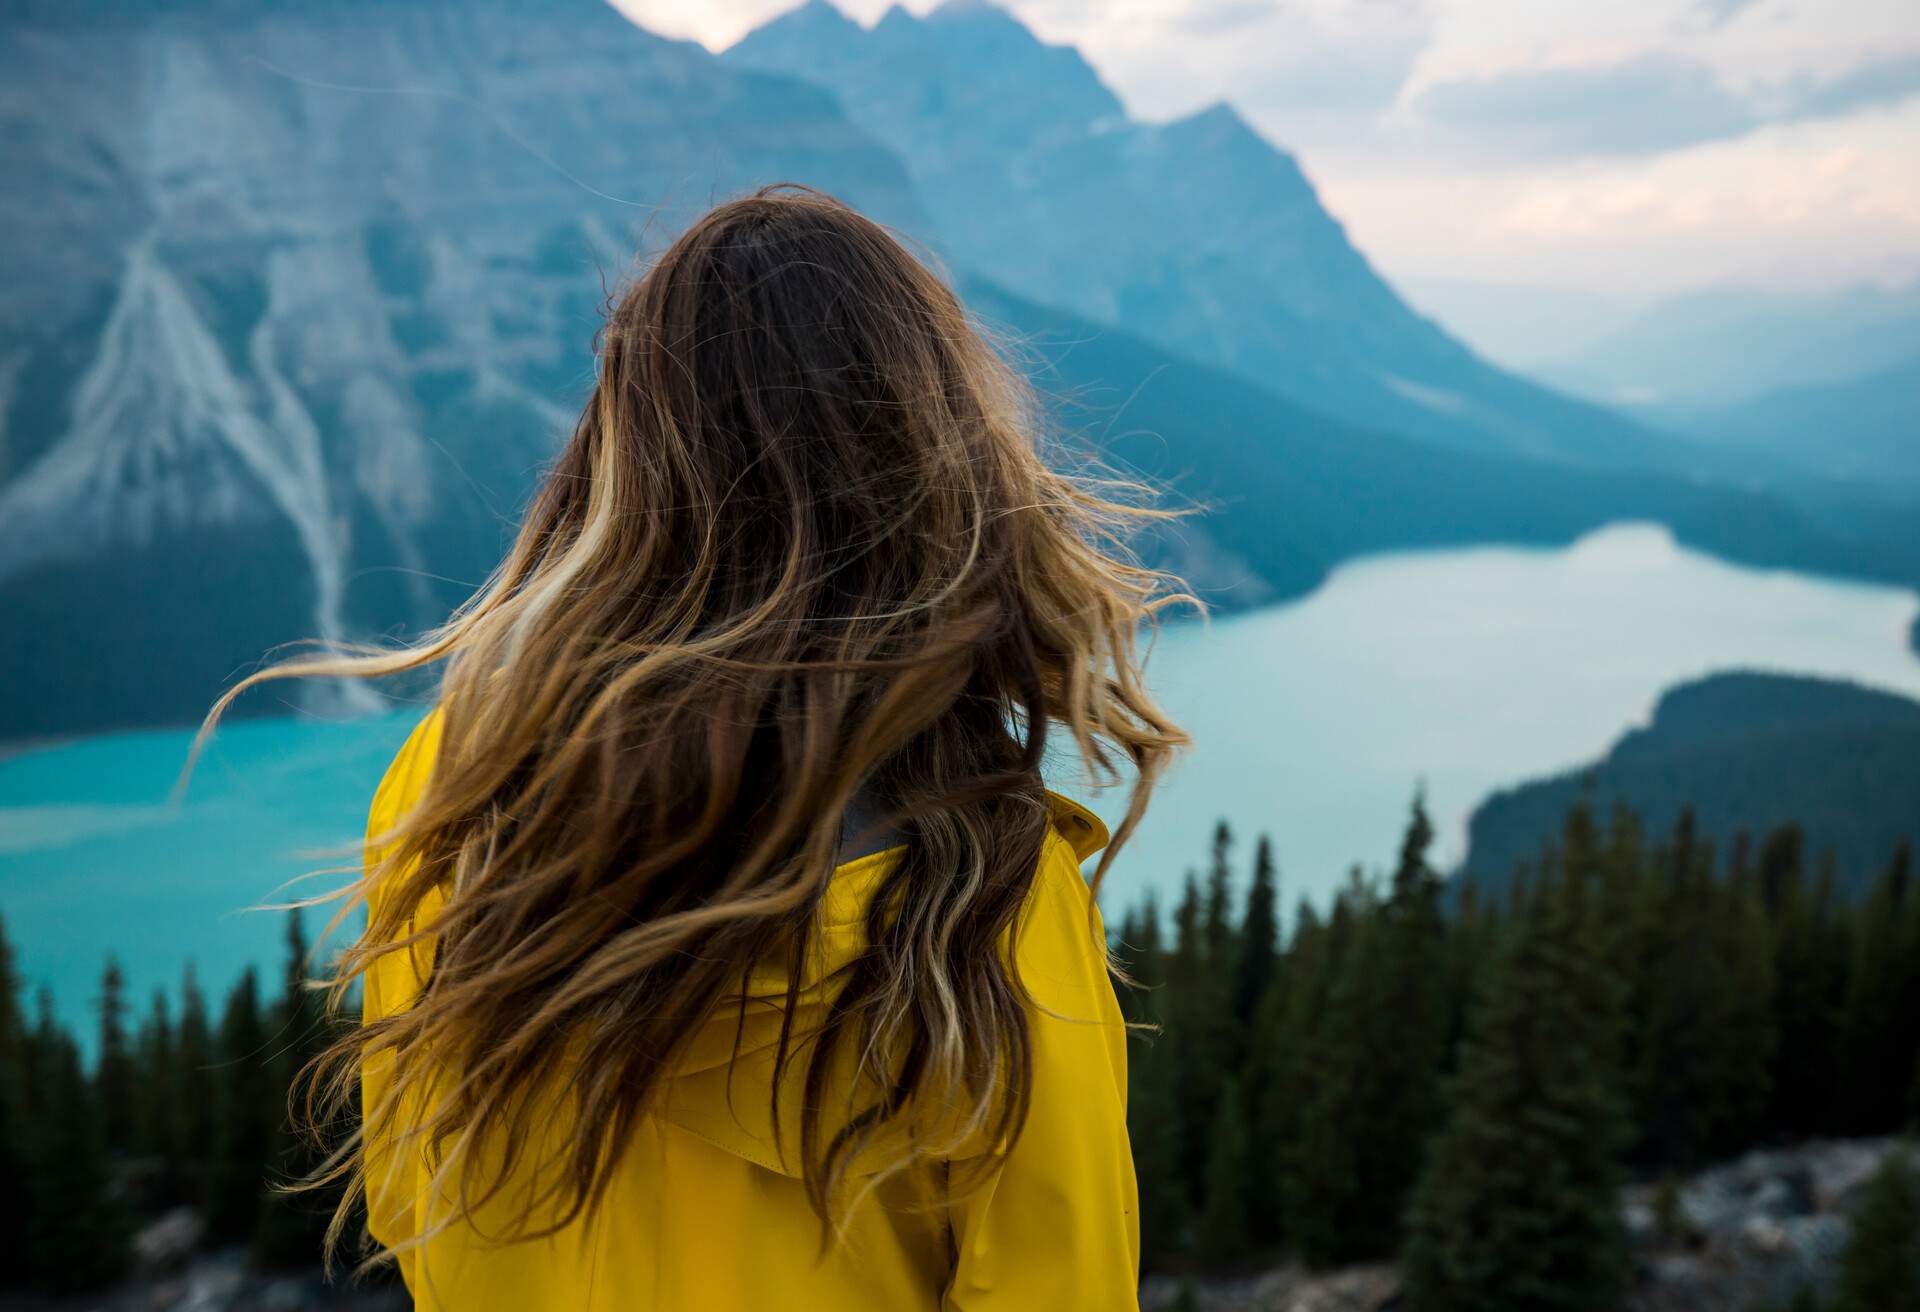 DEST_CANADA_PEYTO_LAKE_WOMAN_GettyImages-1293807561